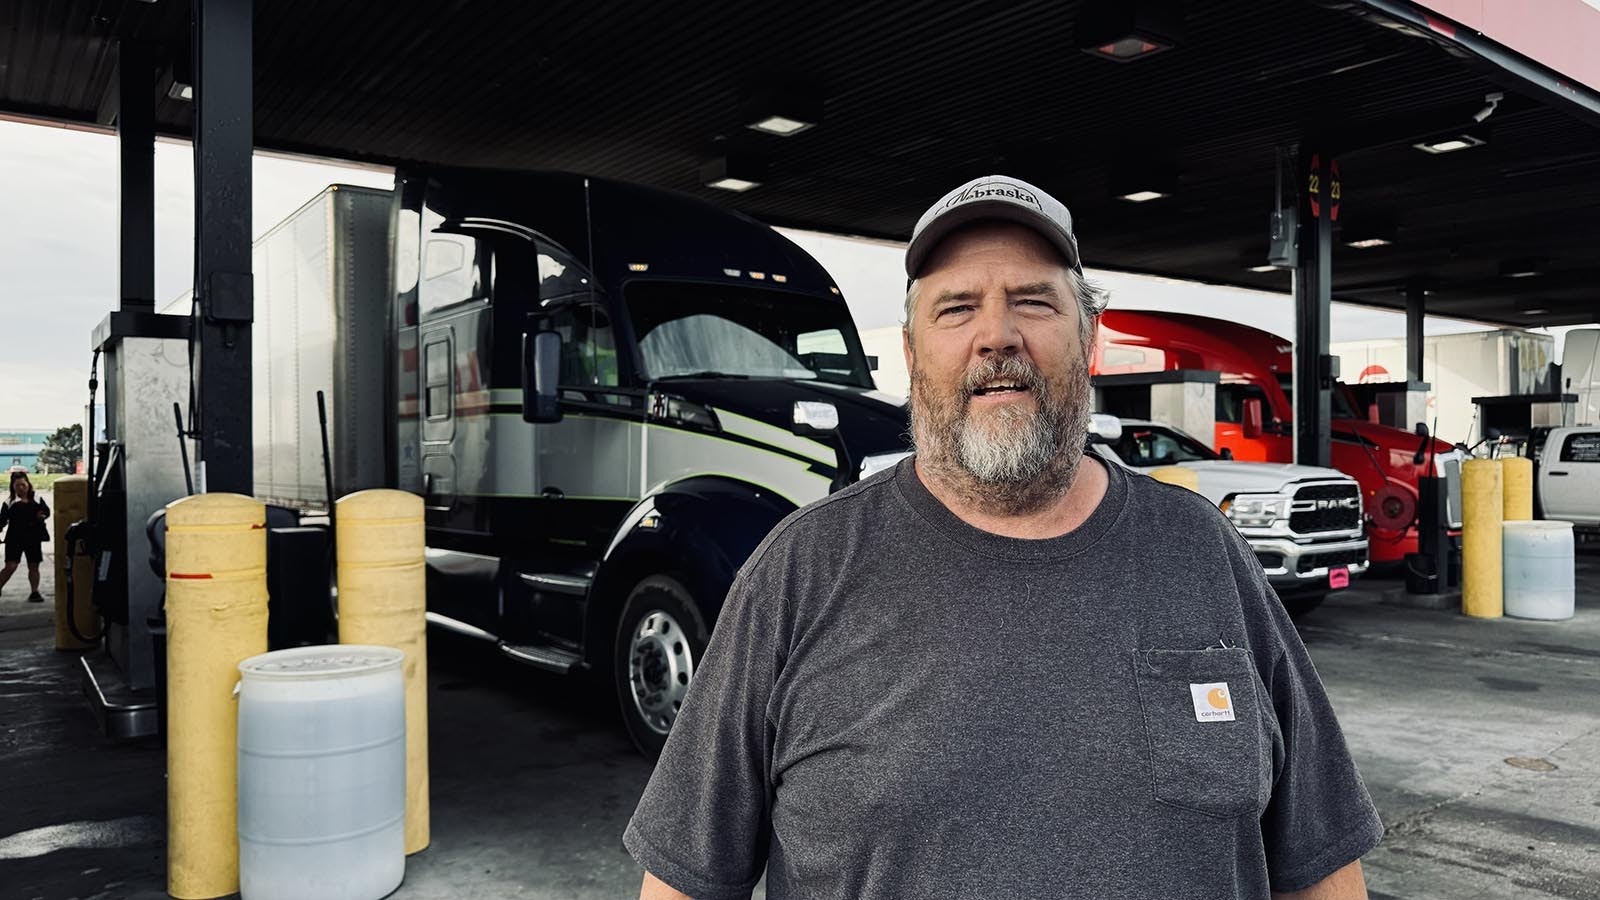 David McCartney is a long-haul truck driver for Landstar System who moves propane tanks from Ferrellgas in Denver, over to Salt Lake City. He’s worried about lengthy traffic delays when construction begins on the replacement of the interchange. “In the long run, it’ll make merging easier – after a decade of waiting – and make it safer than what we currently have,” said McCartney of the Cheyenne interchange makeover.